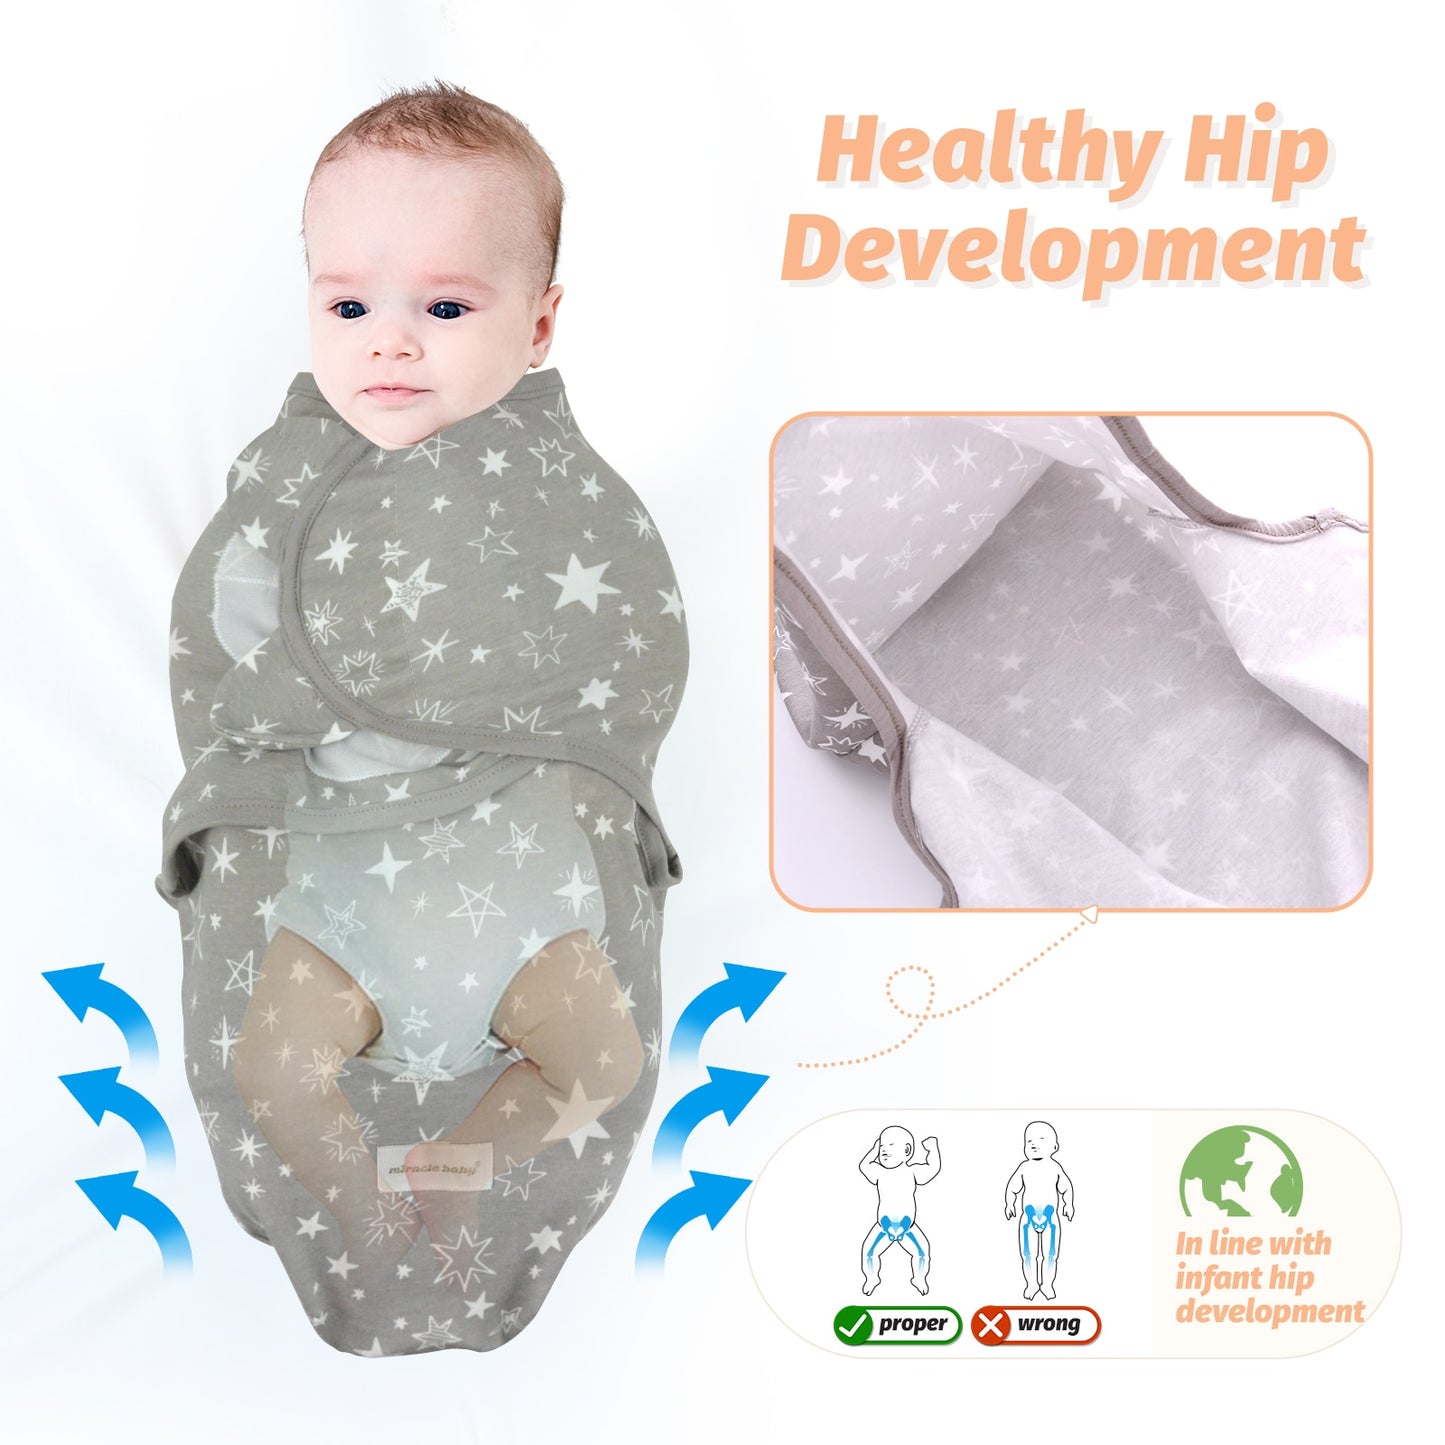 Newborn Swaddle Wrap Cotton Baby Receiving Blanket Bedding Cartoon Cute Infant Sleeping Bag For 0-6 Months